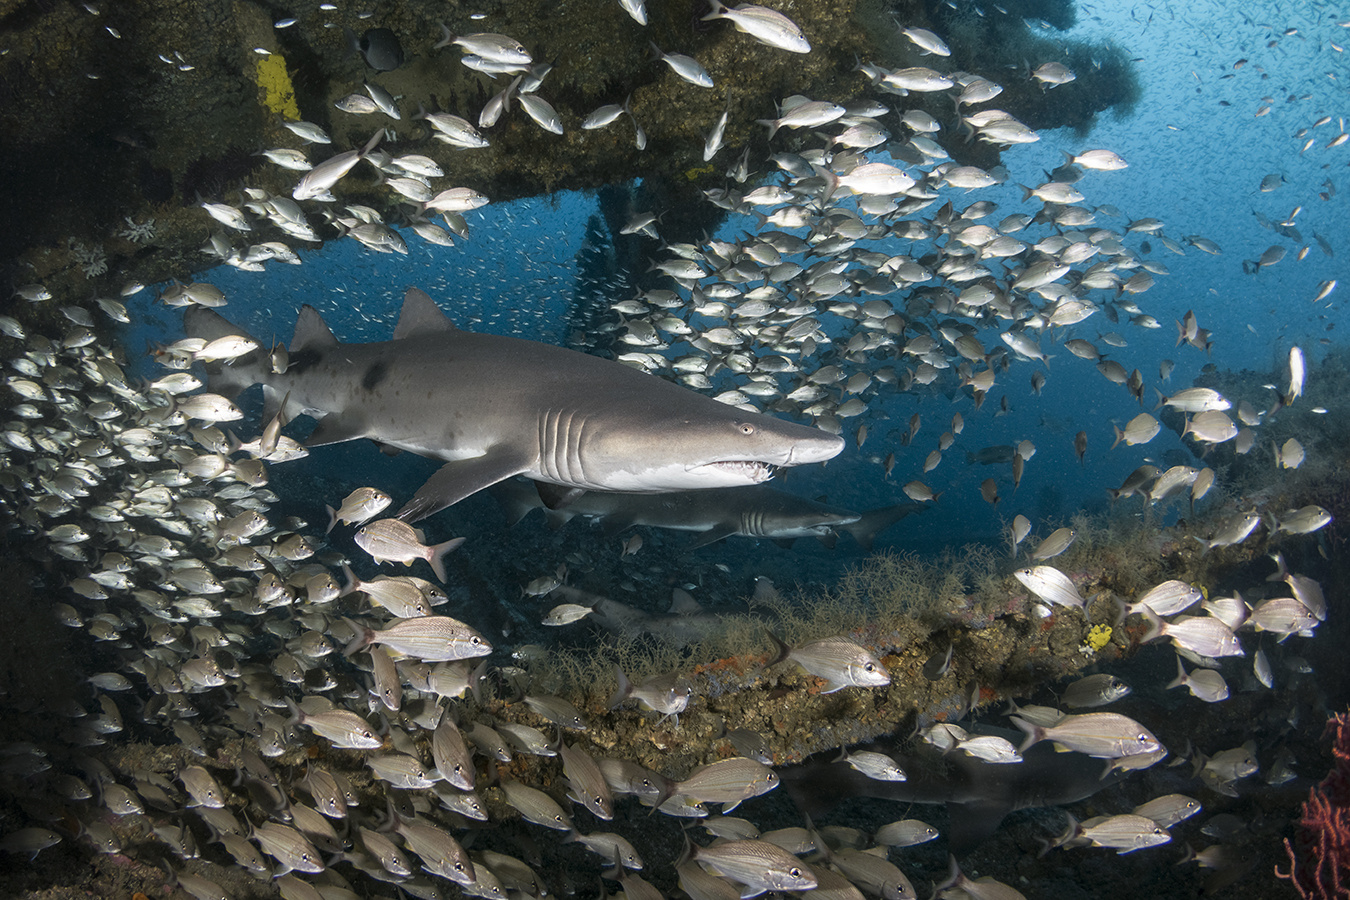 Sand tiger sharks on the wreck of the Caribsea, North Carolina